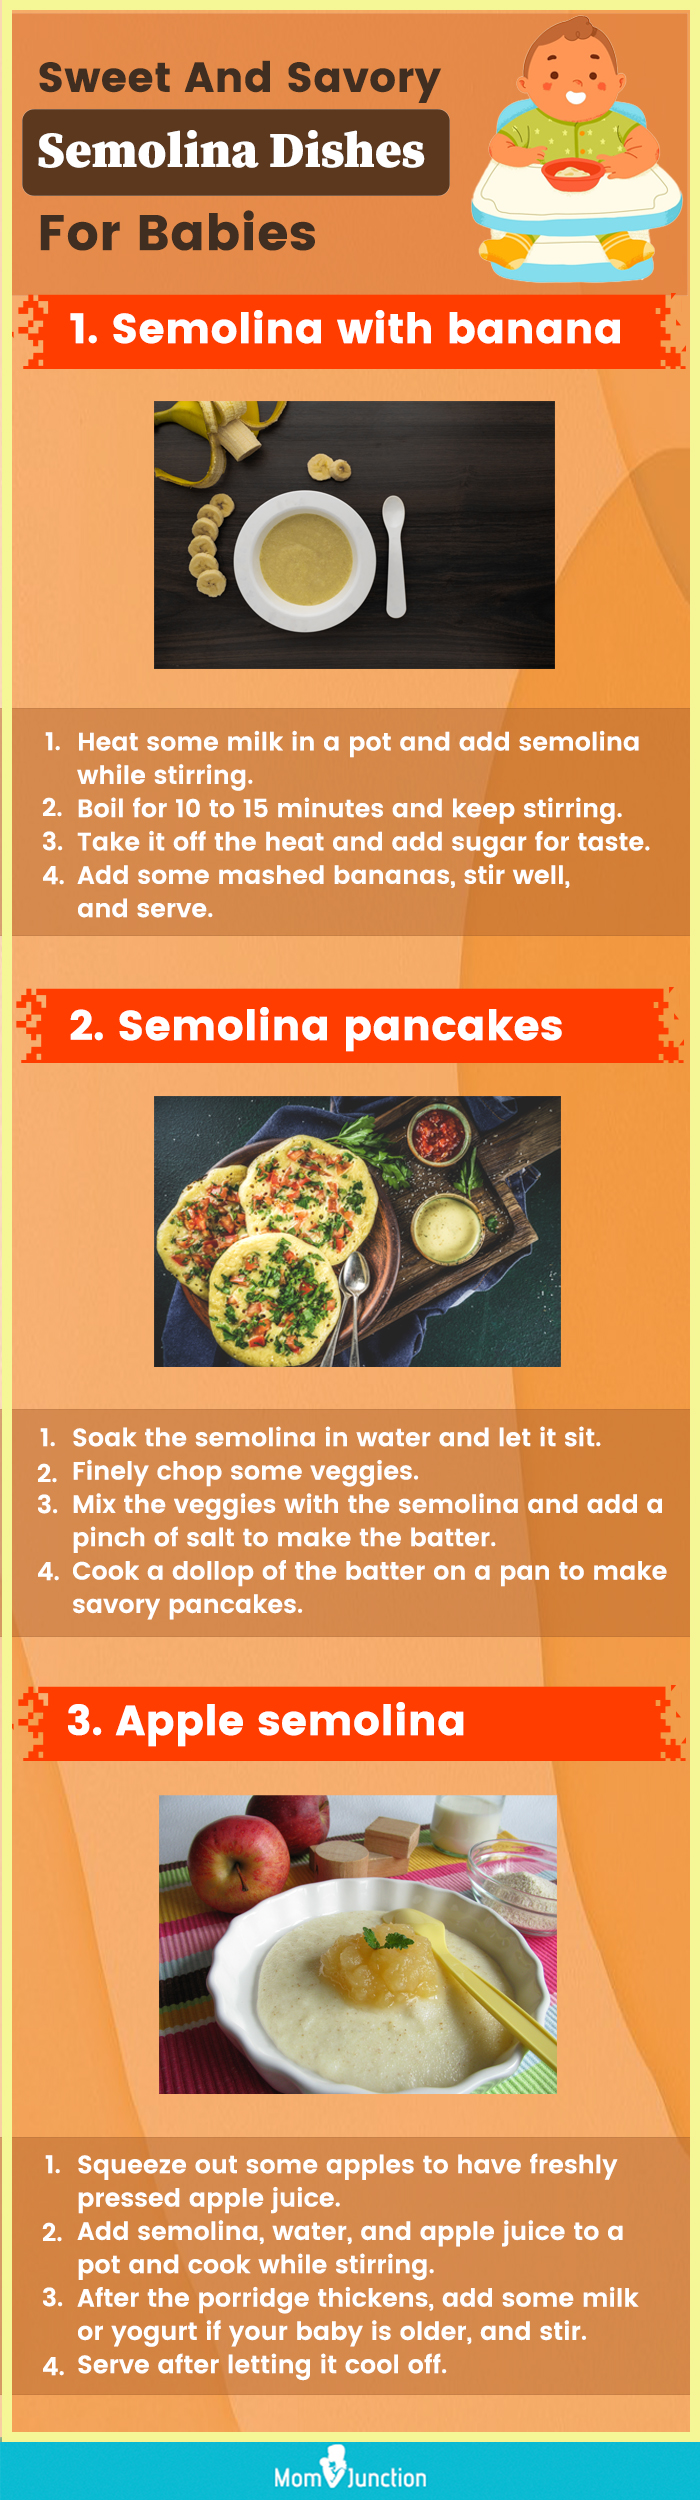 sweet and savory semolina dishes for babies (infographic)